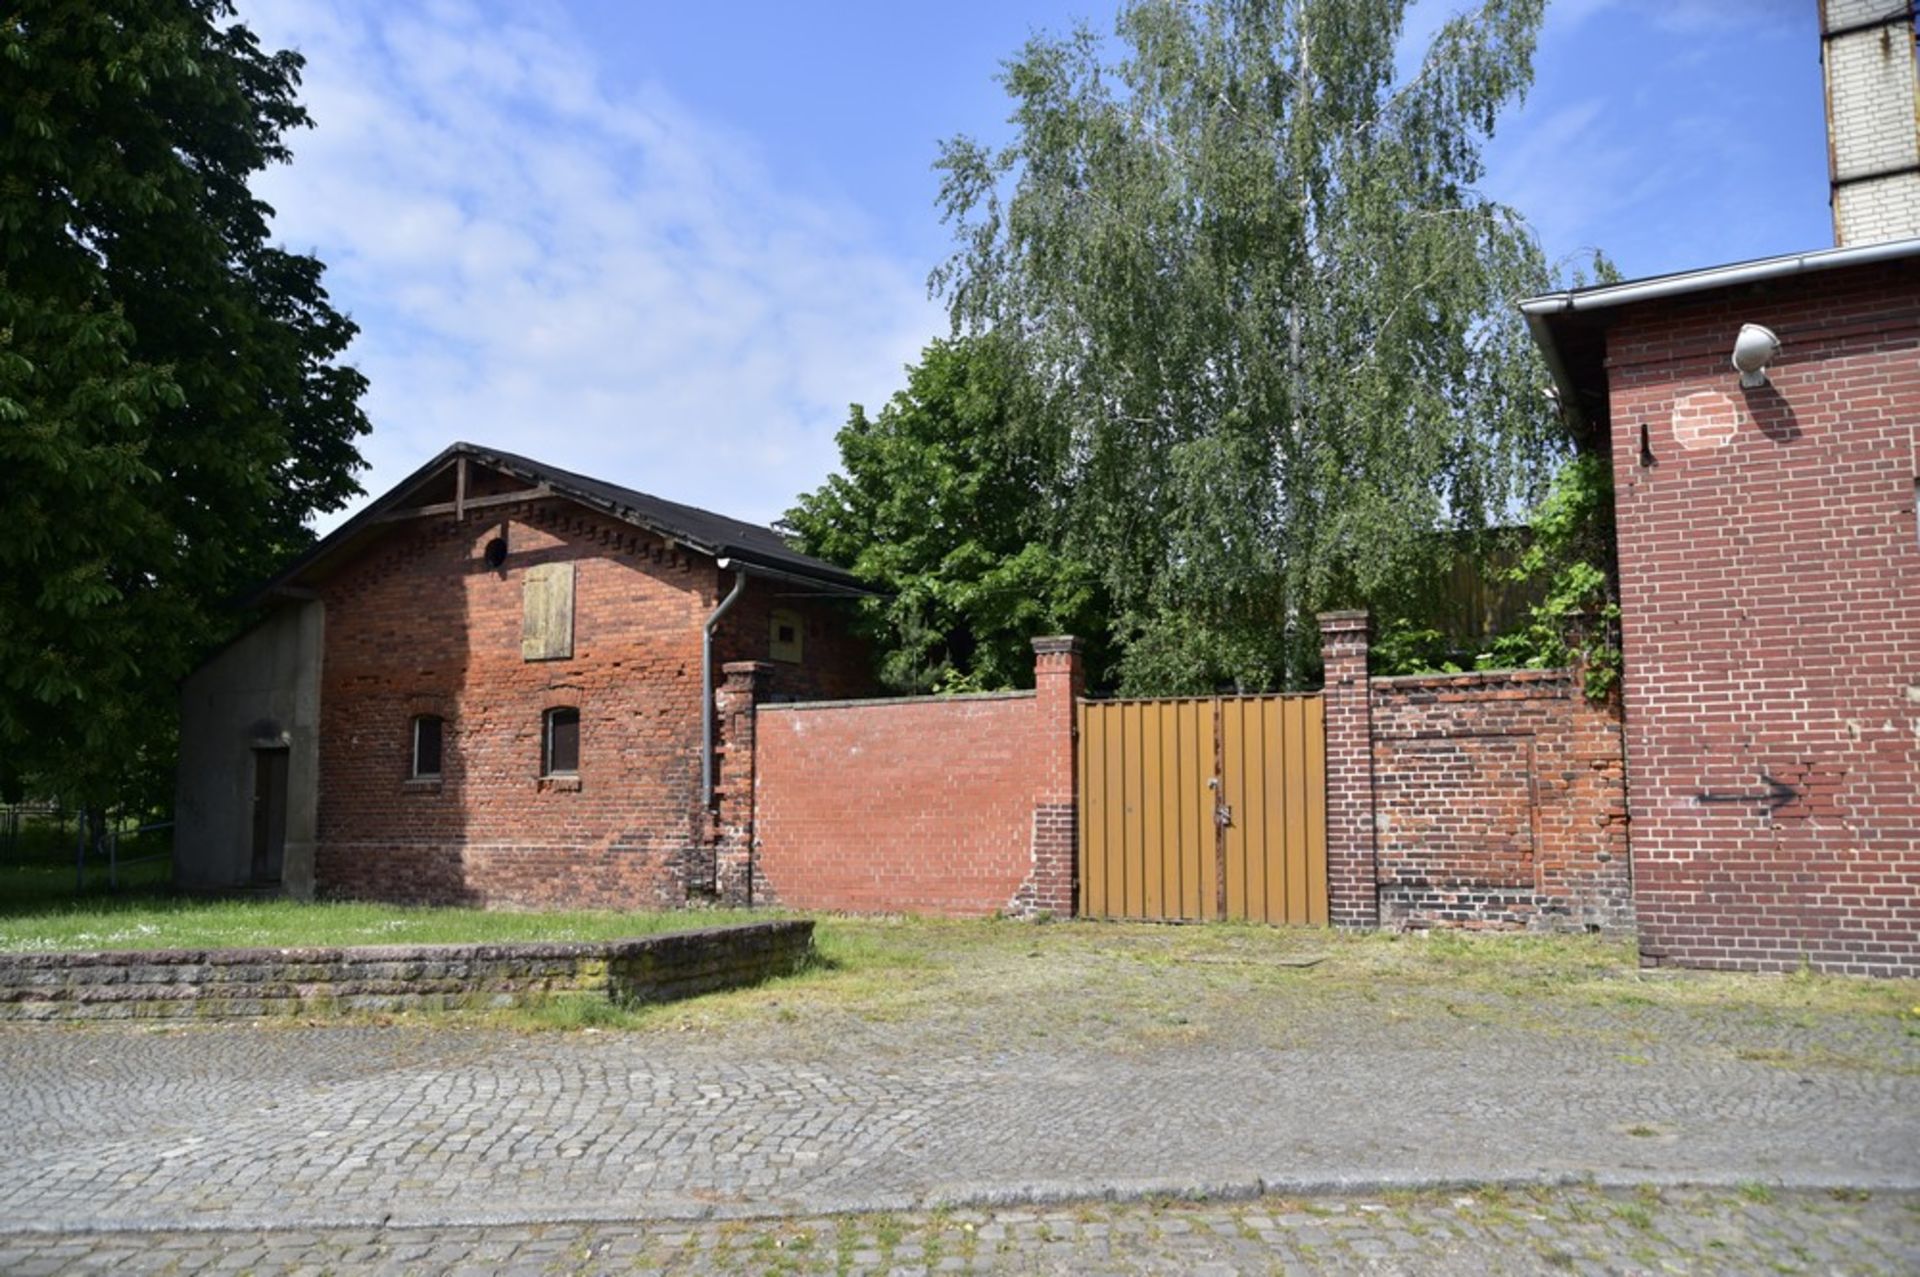 STATION HOUSE, GOODS SHED, OVER ONE ACRE Tangerhütte, Saxony, Germany, - Image 23 of 98